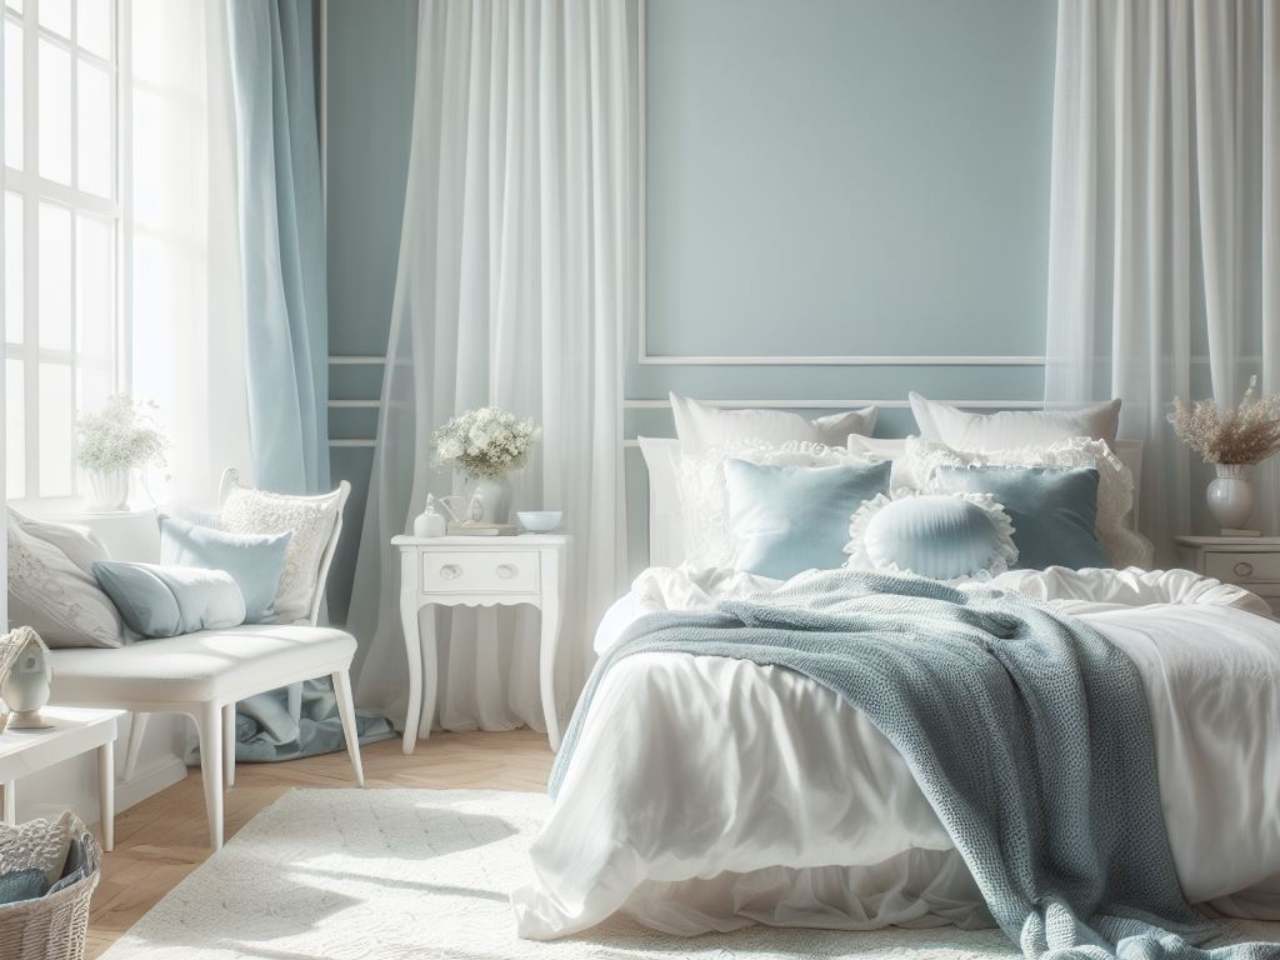 Is Light Blue a Good Color for a Bedroom?(5 Reasons Why It Is)